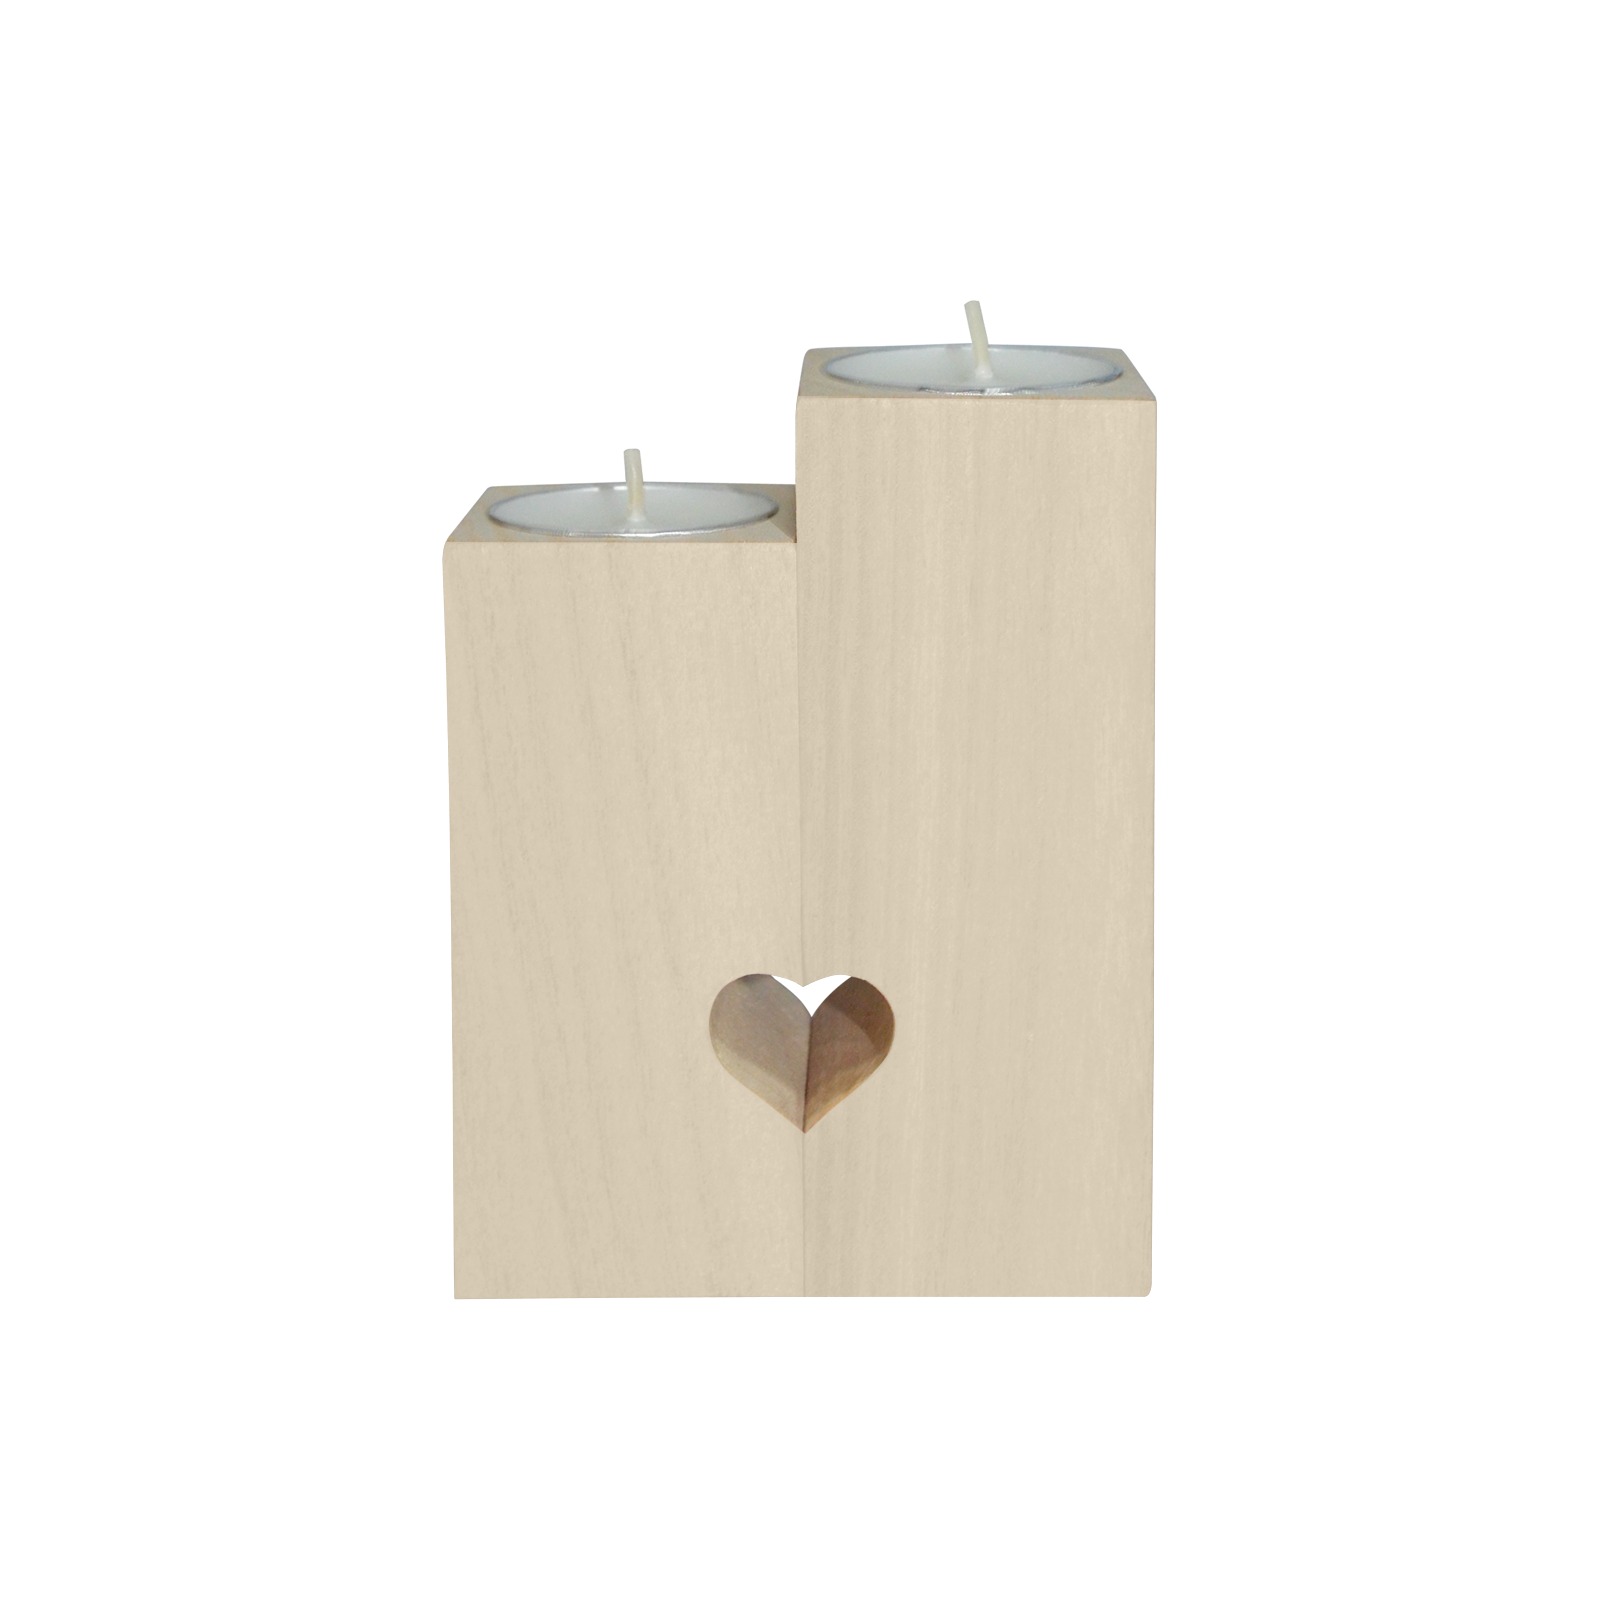 Atlanta by Nico Bielow Wooden Candle Holder (Without Candle)